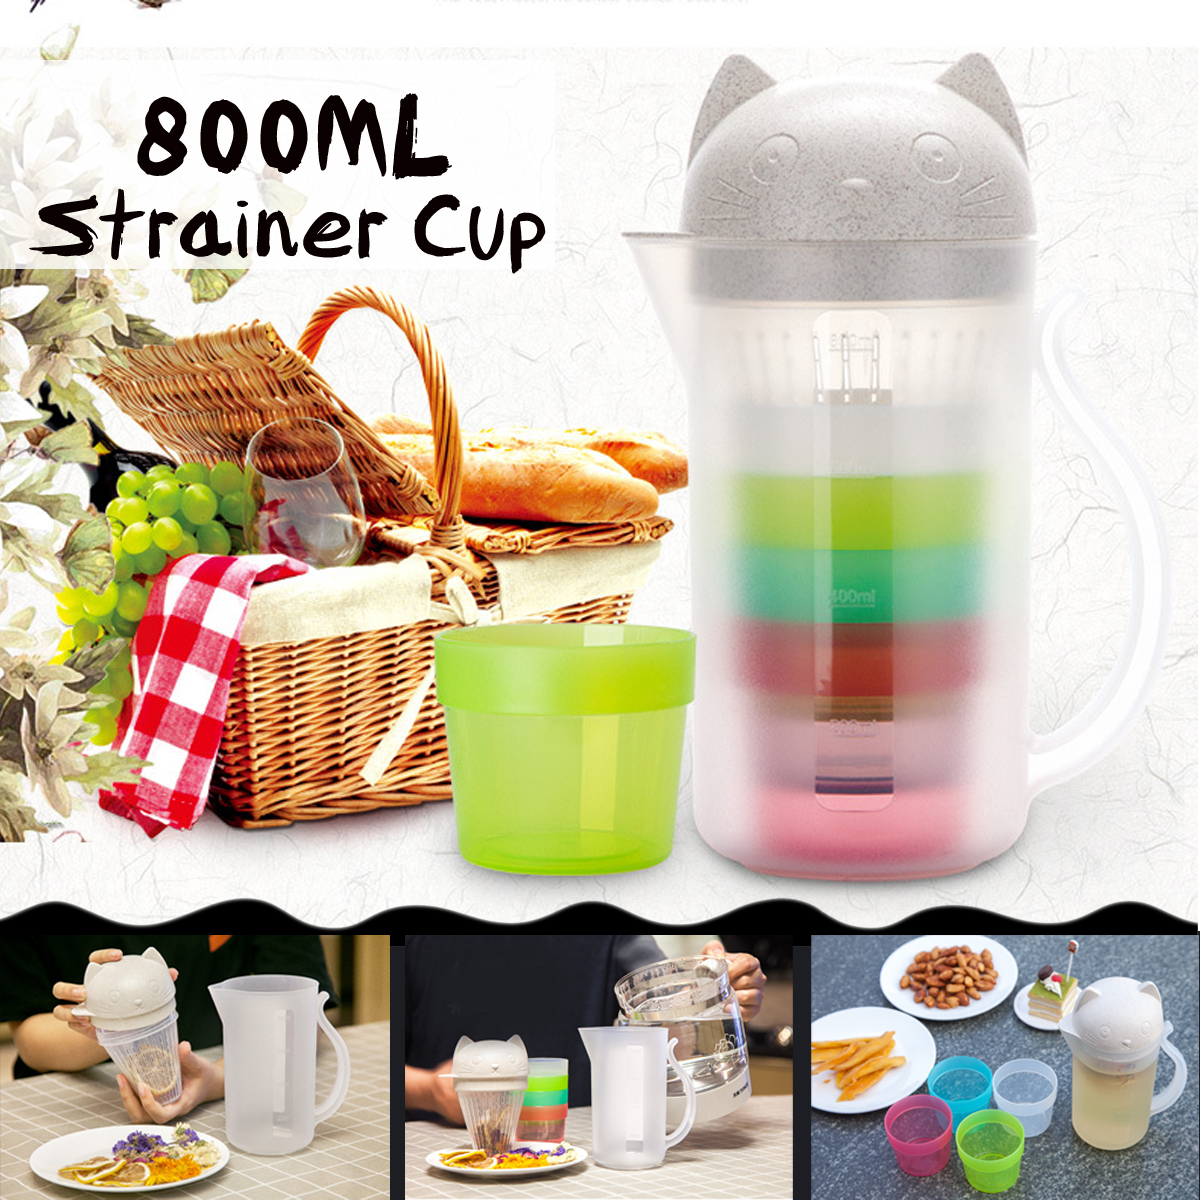 800ML-Outdoor-Portable-Strainer-Cup-Water-Bottle-Teapot-Juice-Drinking-Mug-Kettle-1414605-1